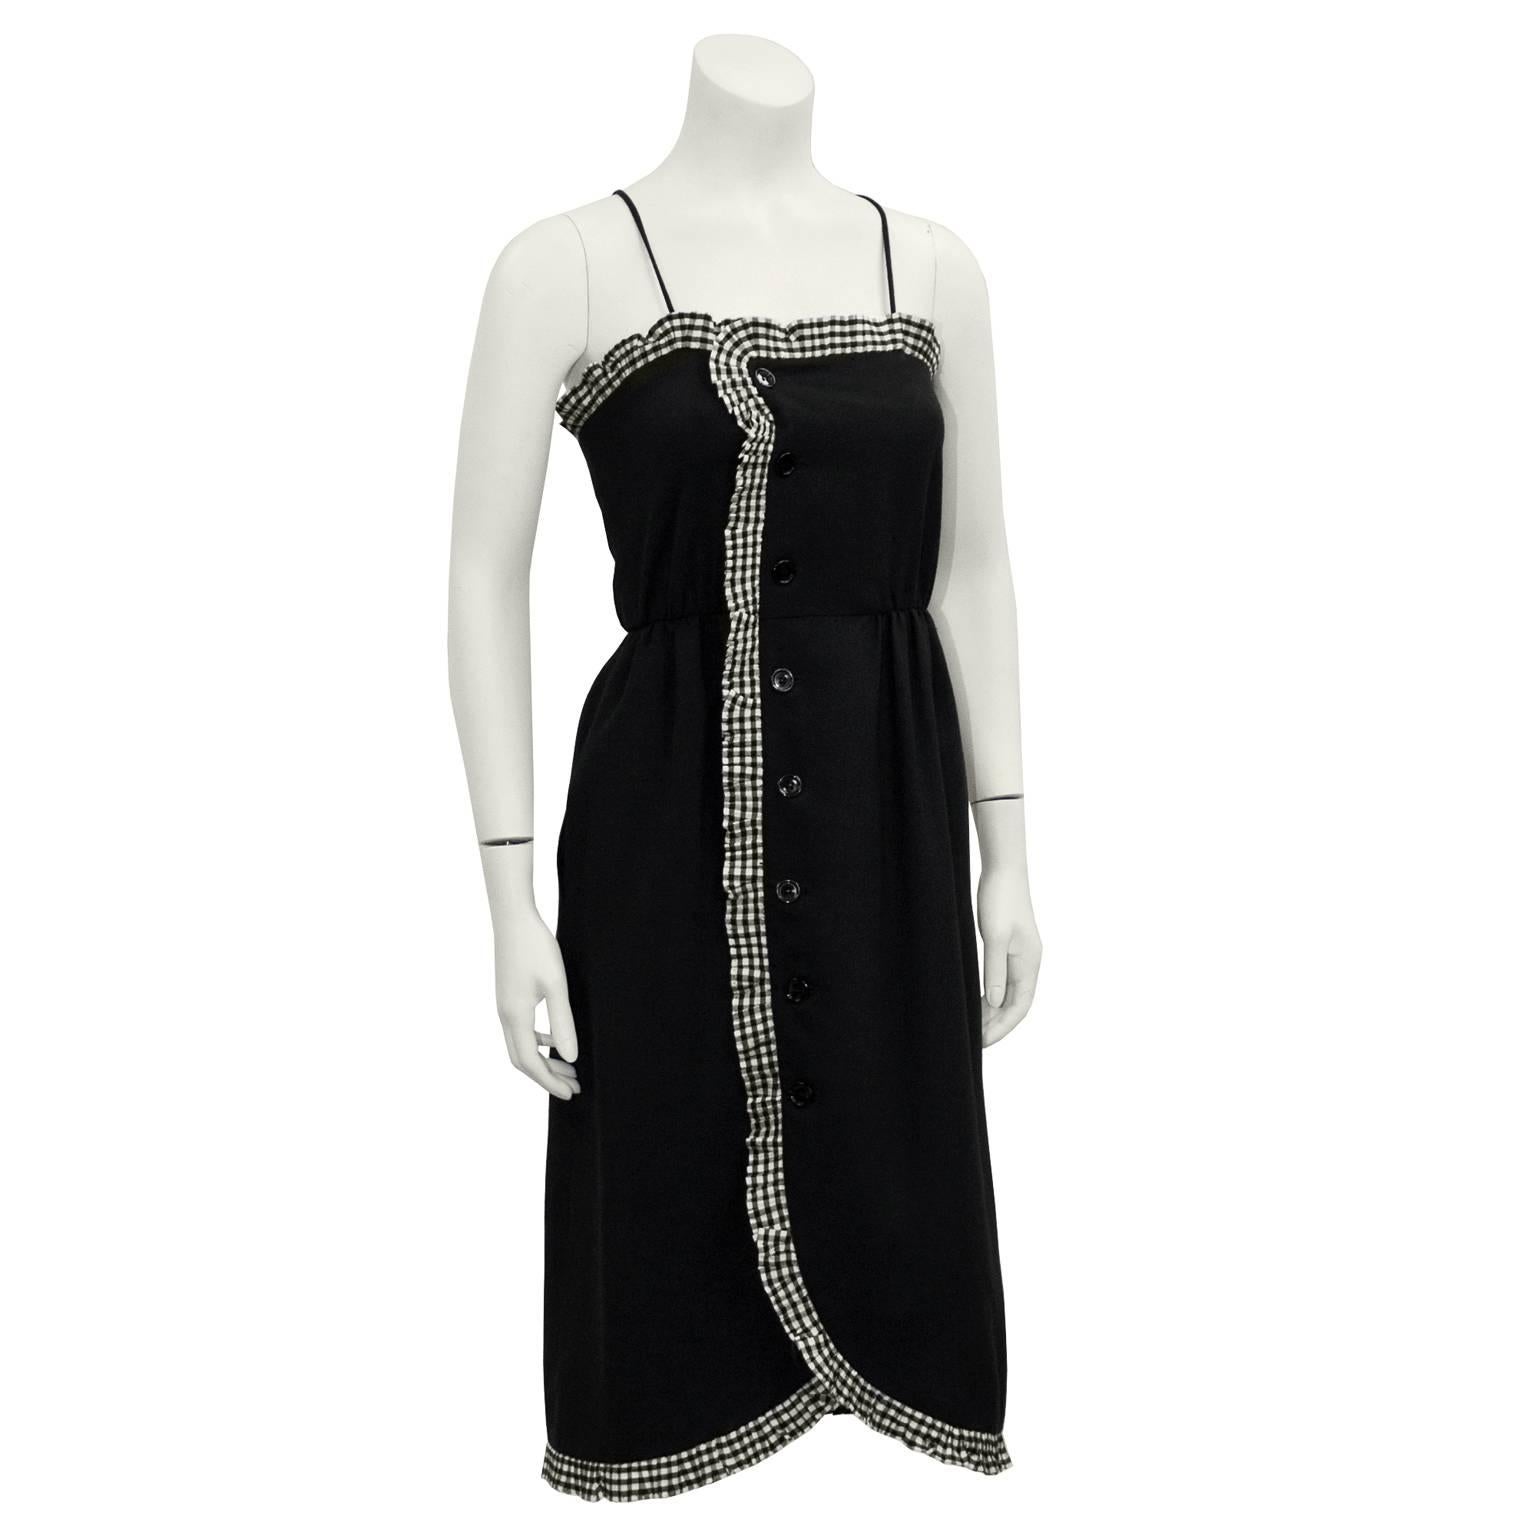 Adorable early 1980's Victor Costa black cotton wrap dress with a black and white gingham ruffle trim. Features camisole neckline with spaghetti straps. Cinched at waist. Button closure down front left with black buttons. Excellent vintage